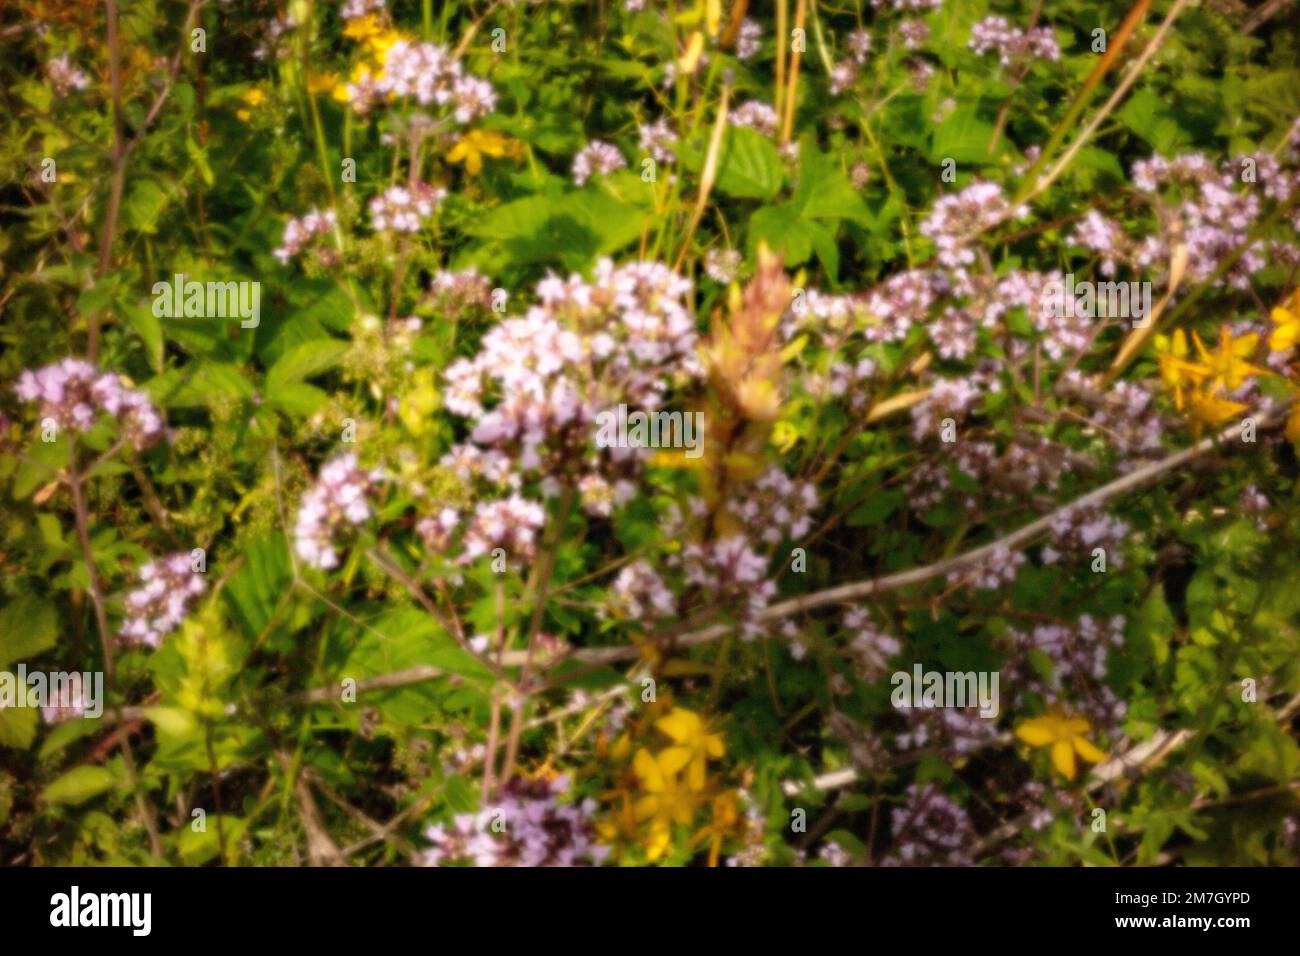 New, Age-defying, digital age, lensless, stand-out, high resolution, natural, close up pinhole image of Hedgerow flowers in their environment Stock Photo